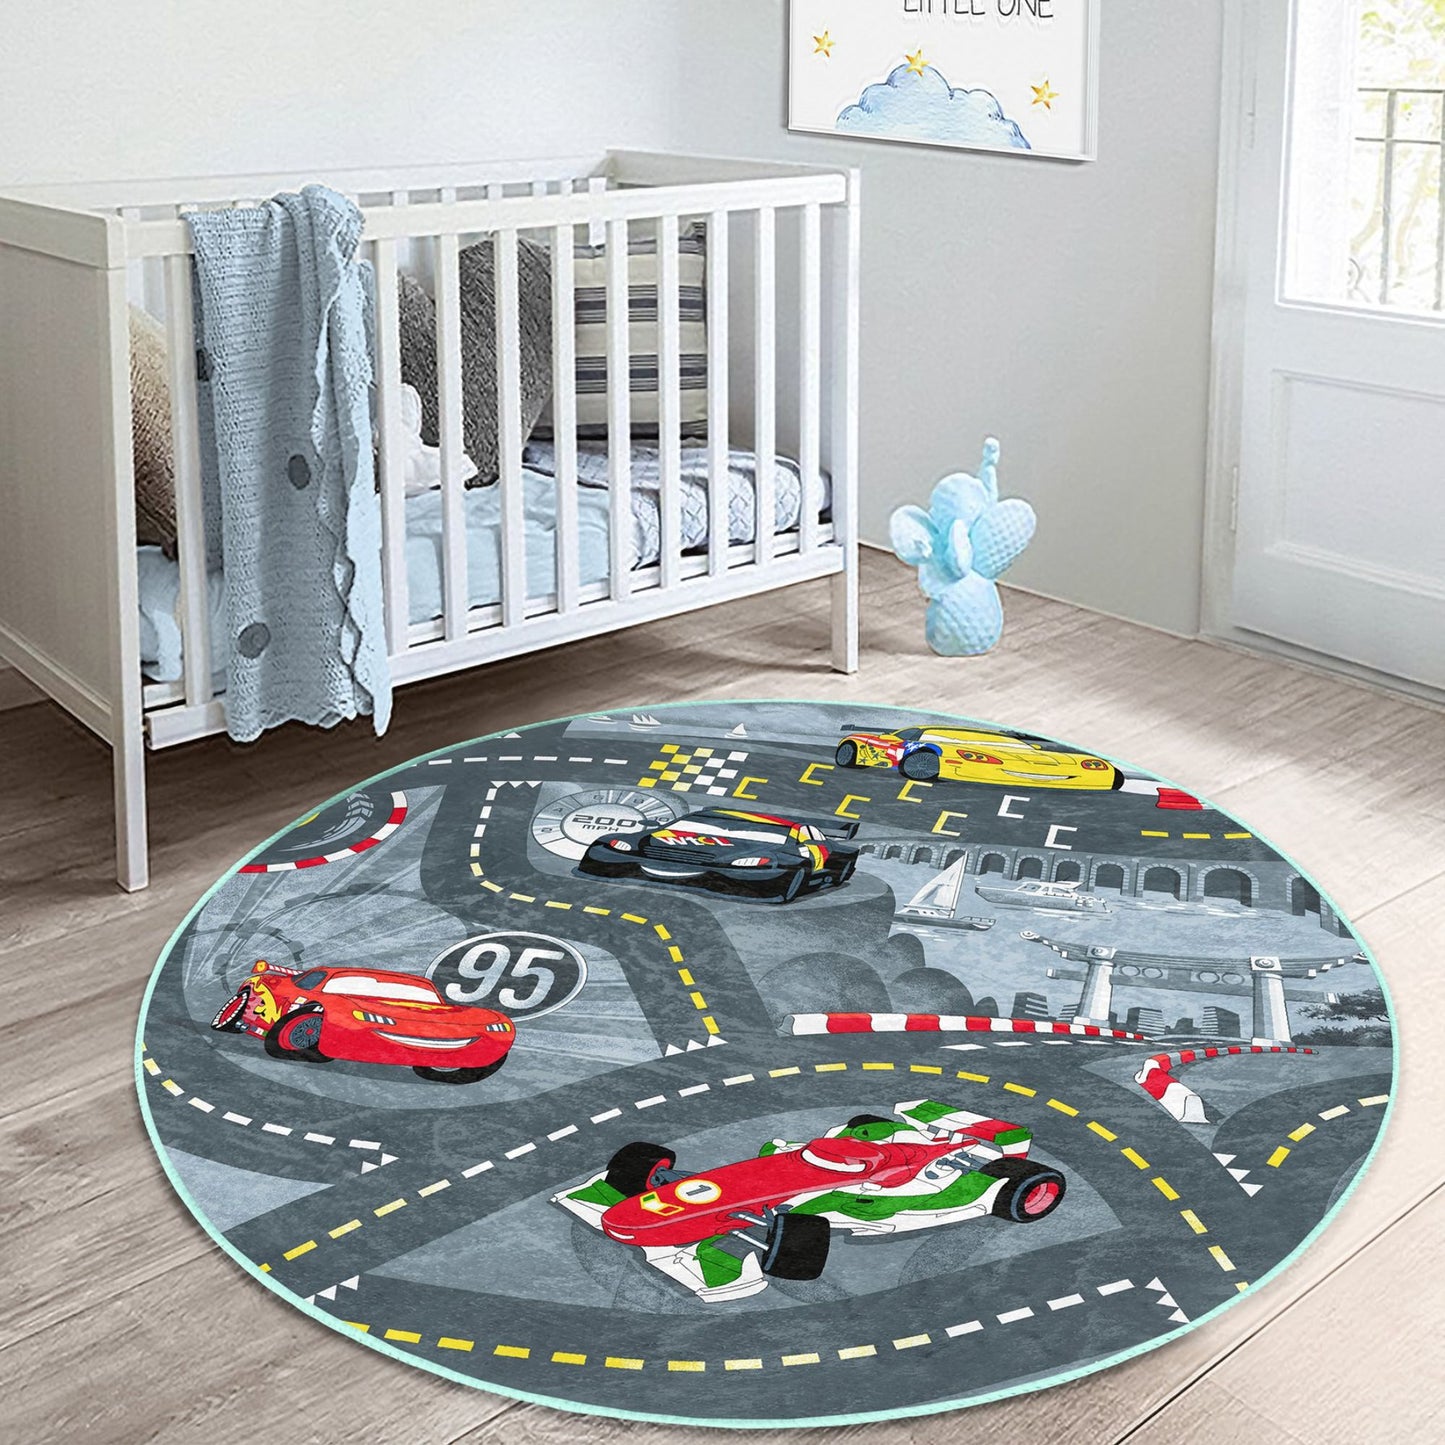 Homeezone's Race Cars and Roads Patterned Boys' Room Washable Rug